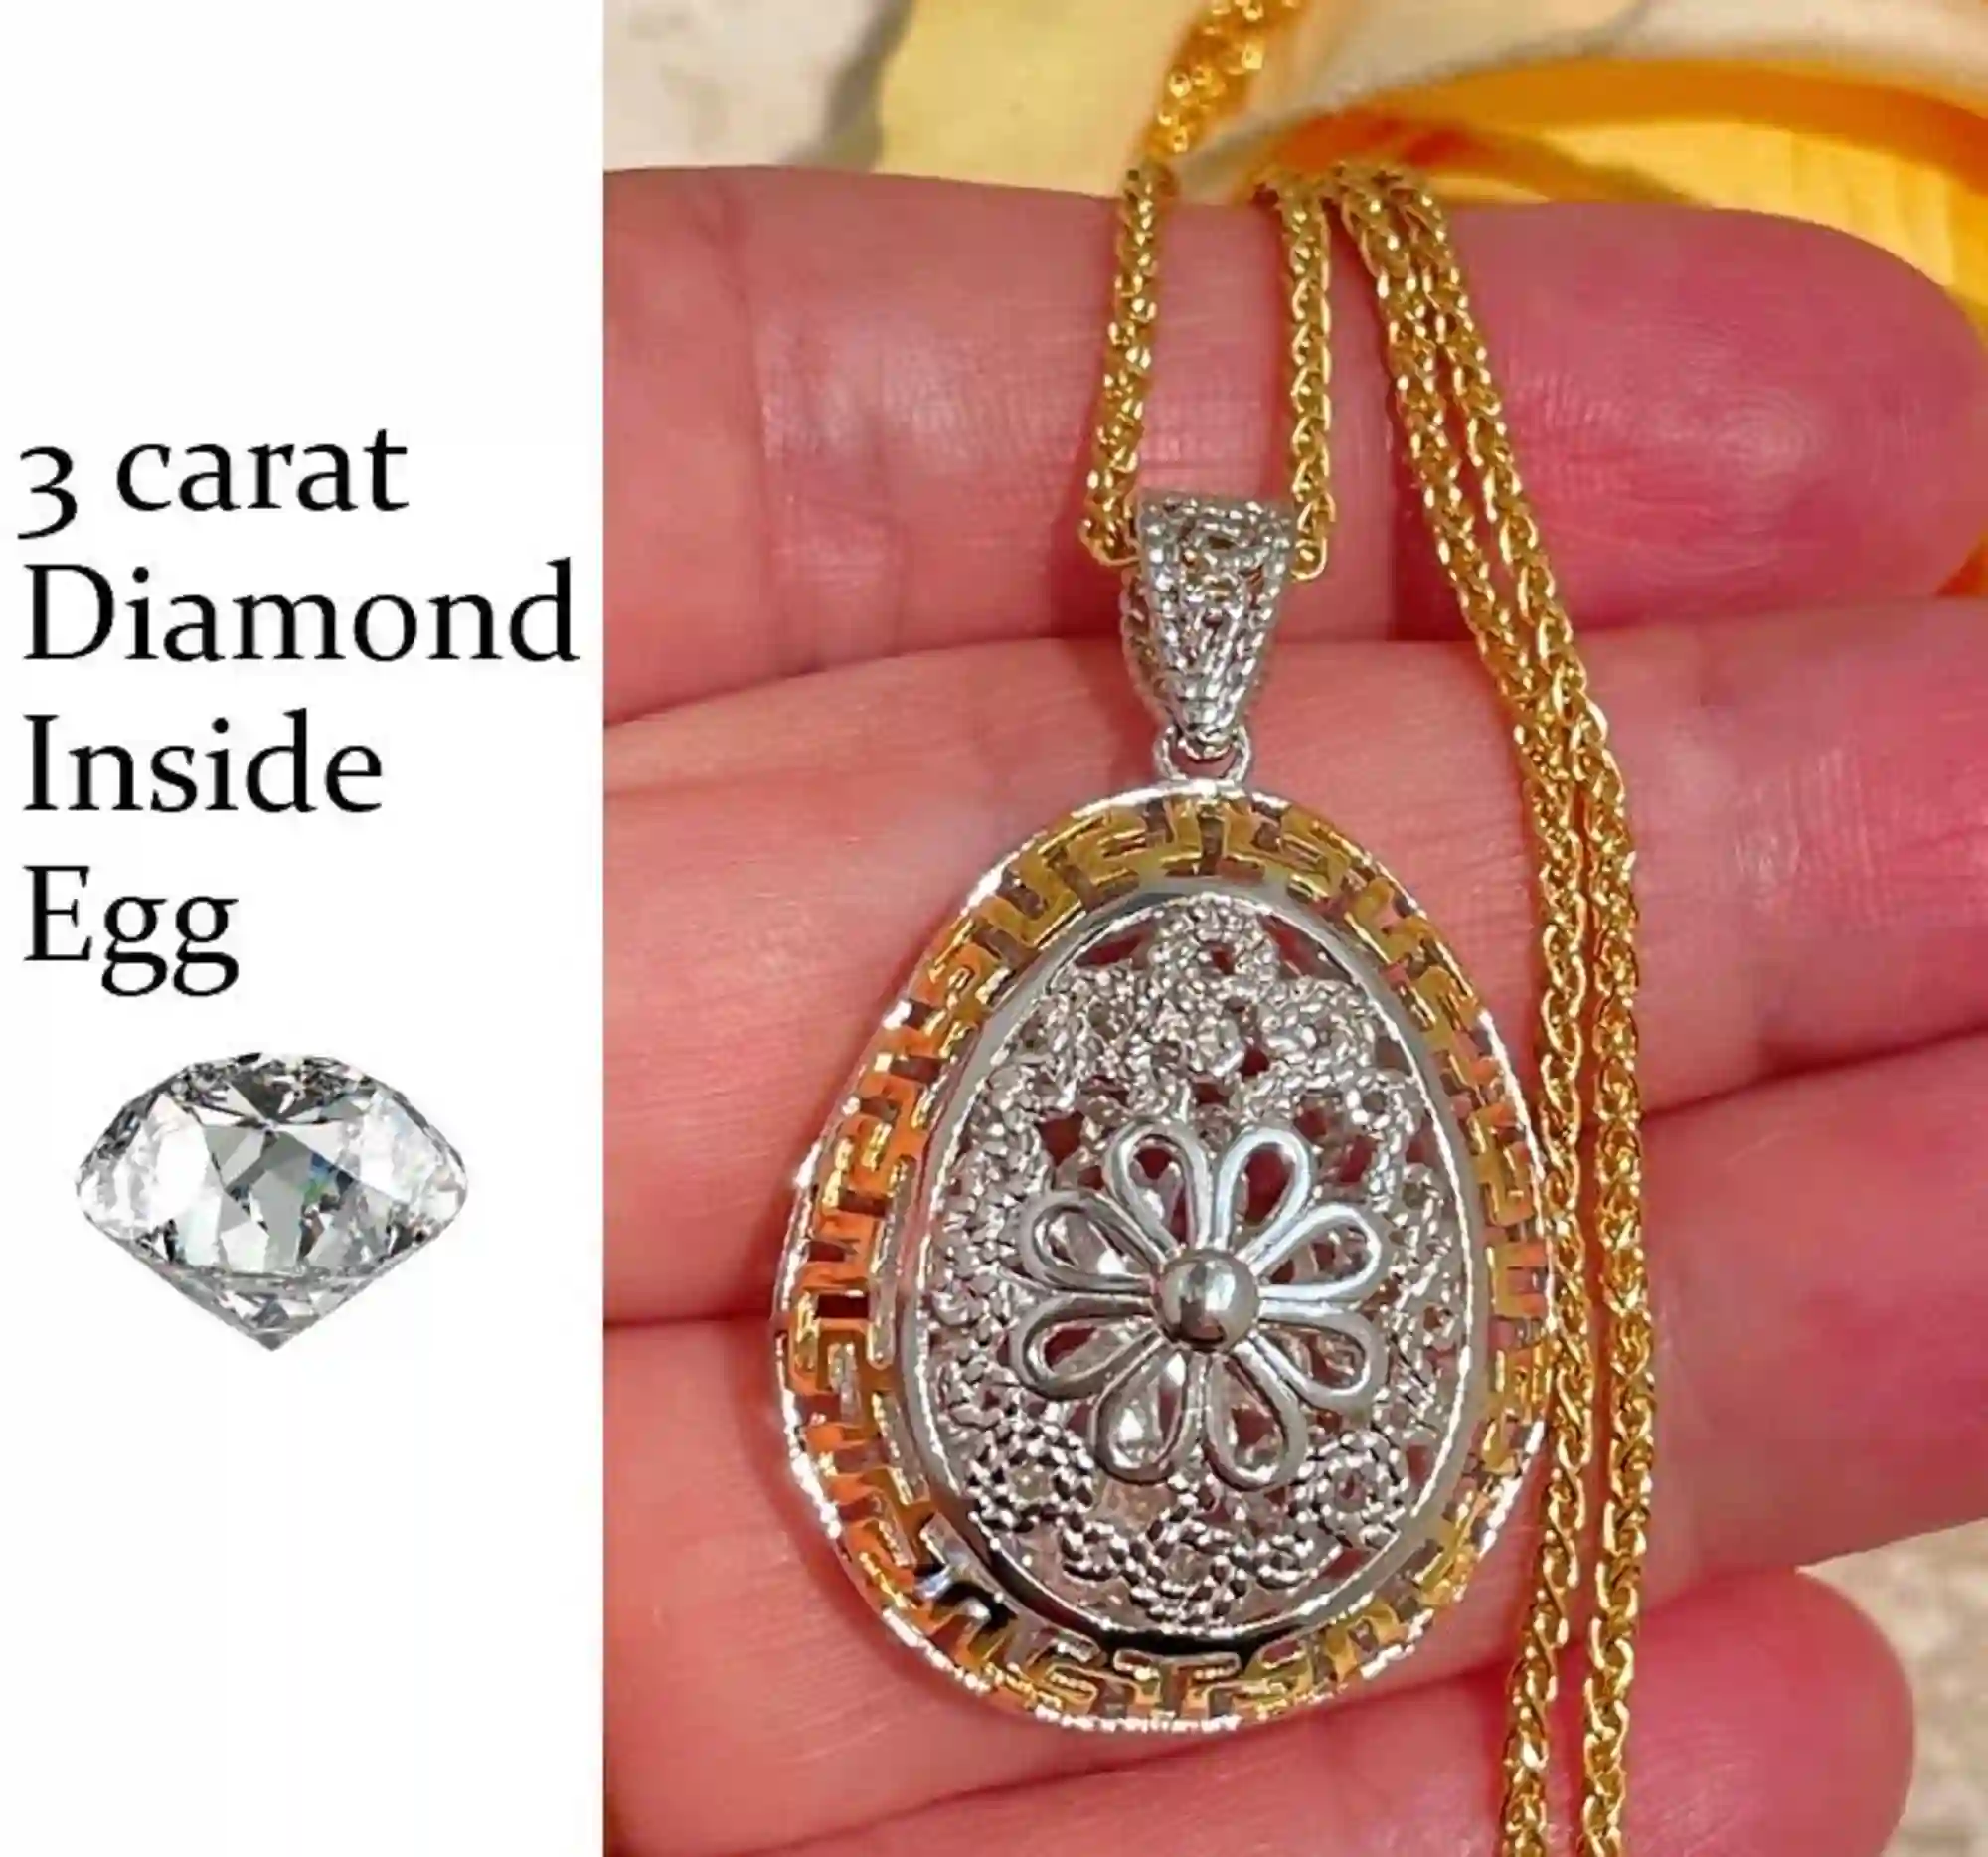 3carat, Lady DIAMOND Necklace, Faberge Egg Charm, Silver Anniversary gift for her, Christmas gift idea for women, 25th birthday , BDAY 